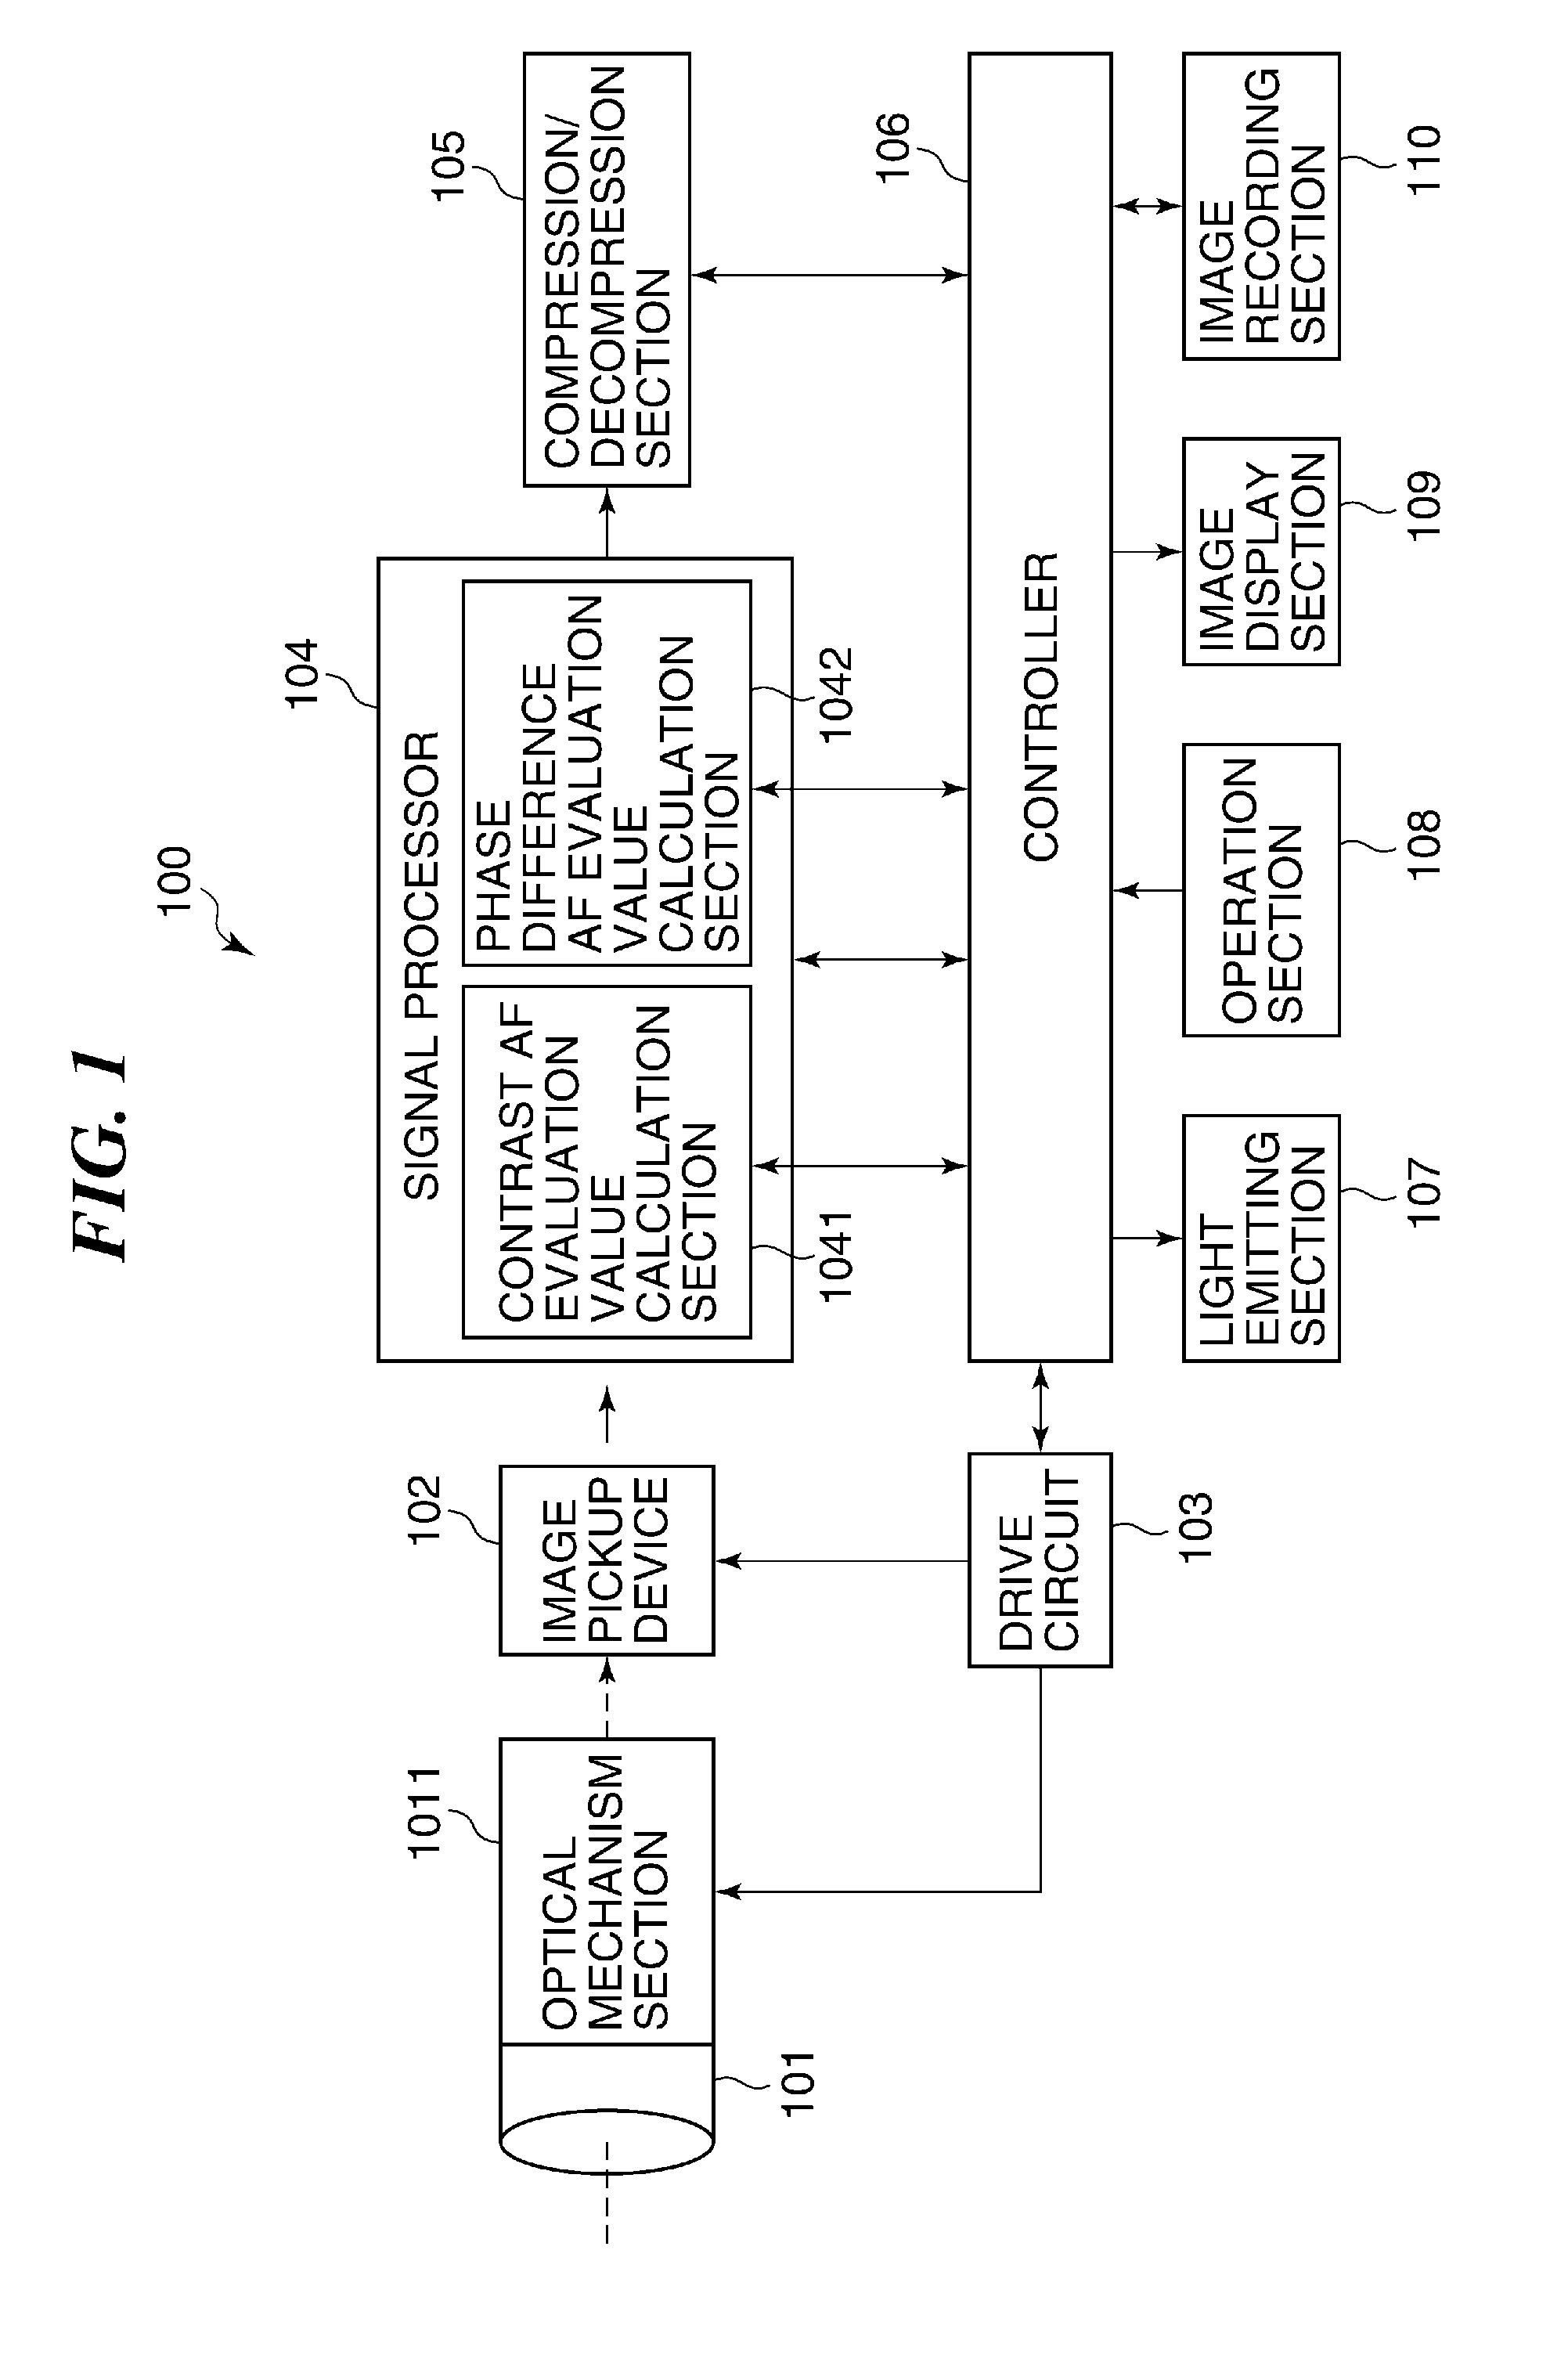 Image pickup apparatus that displays image based on signal output from image pickup device, method of controlling the same, and storage medium